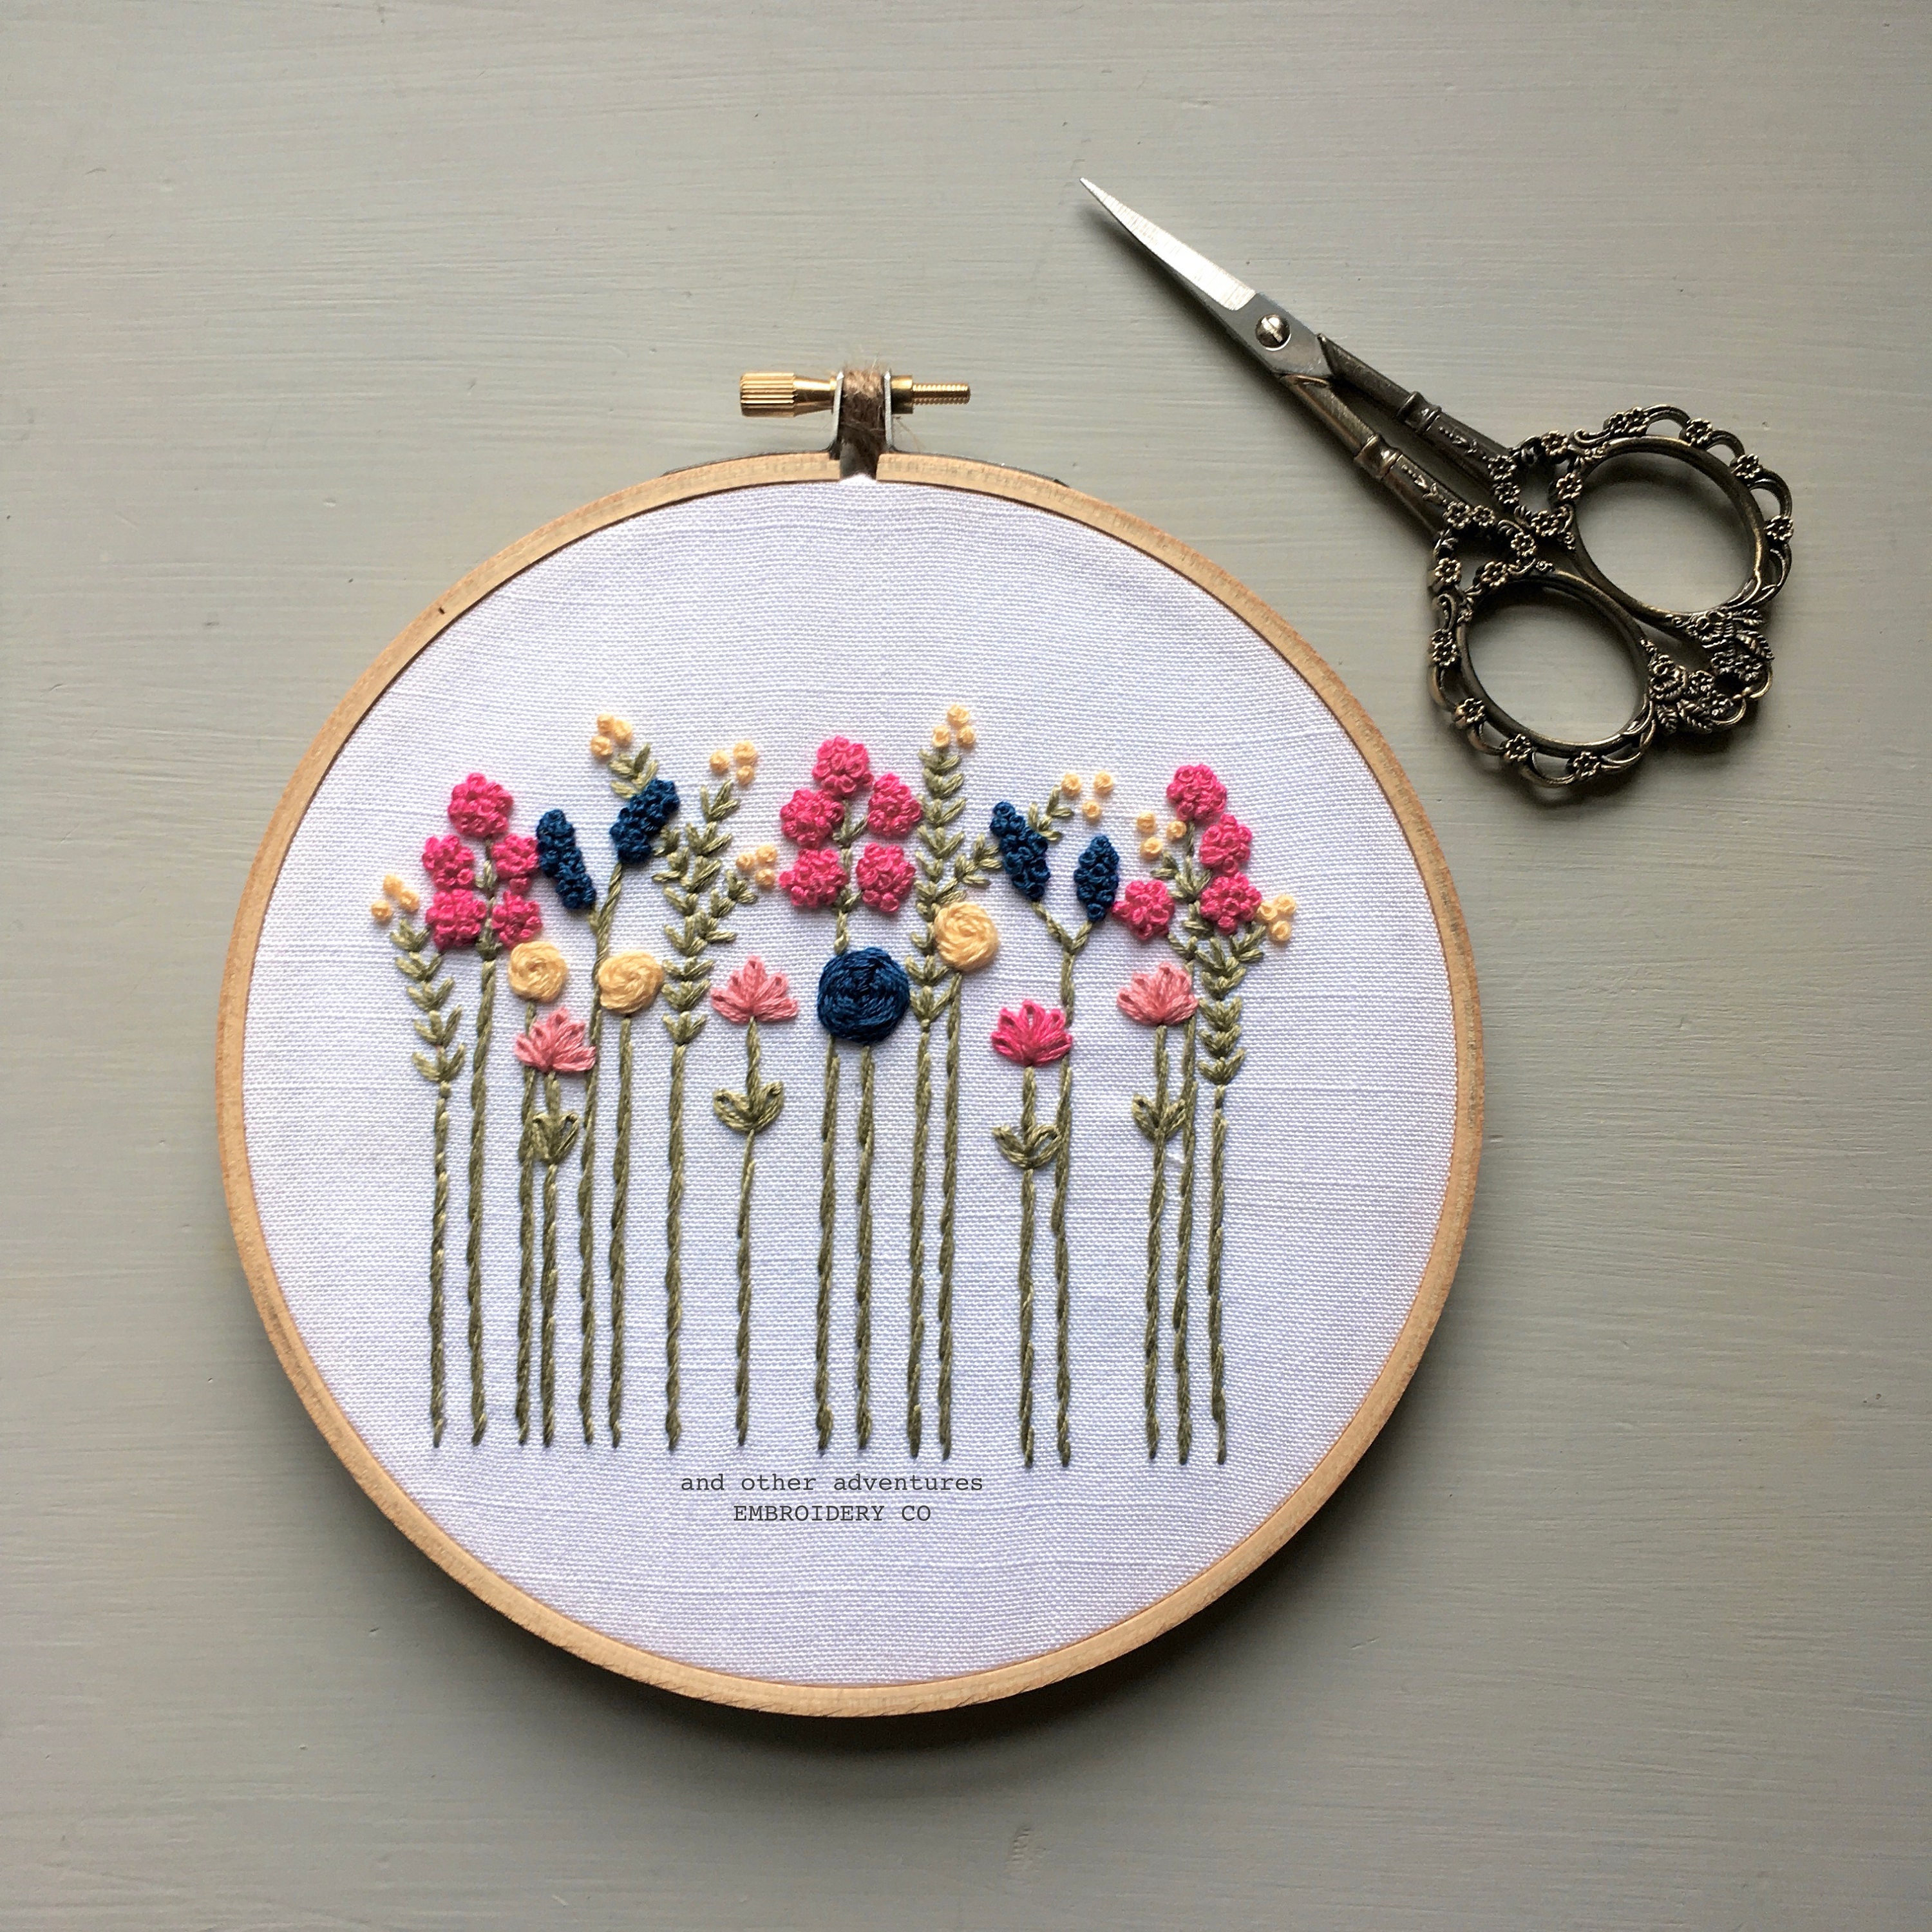 How to Use Hand Embroidery Hoops 